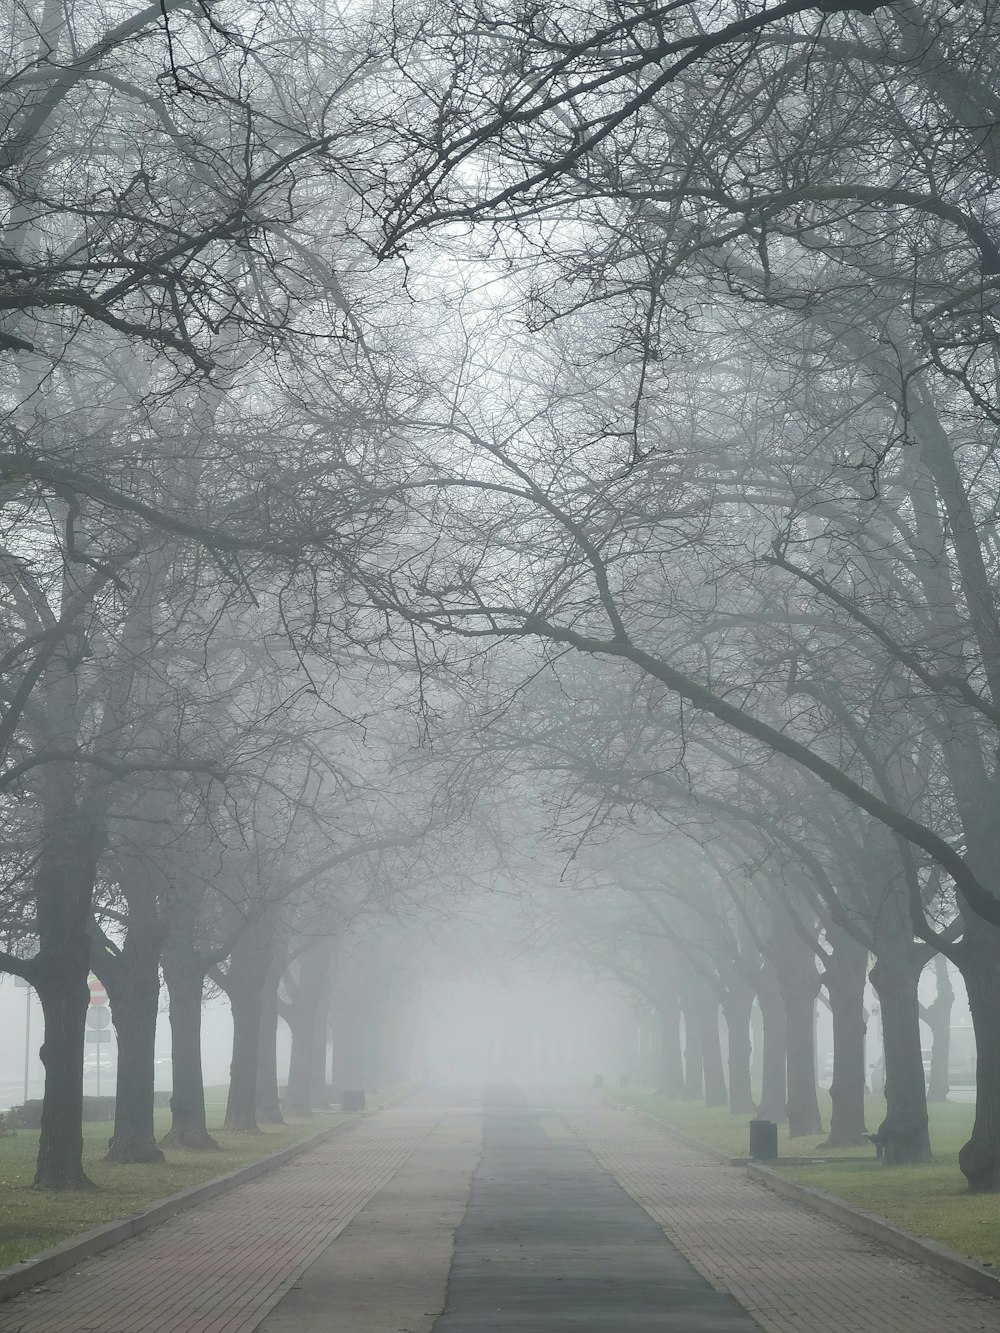 a foggy street lined with trees and benches